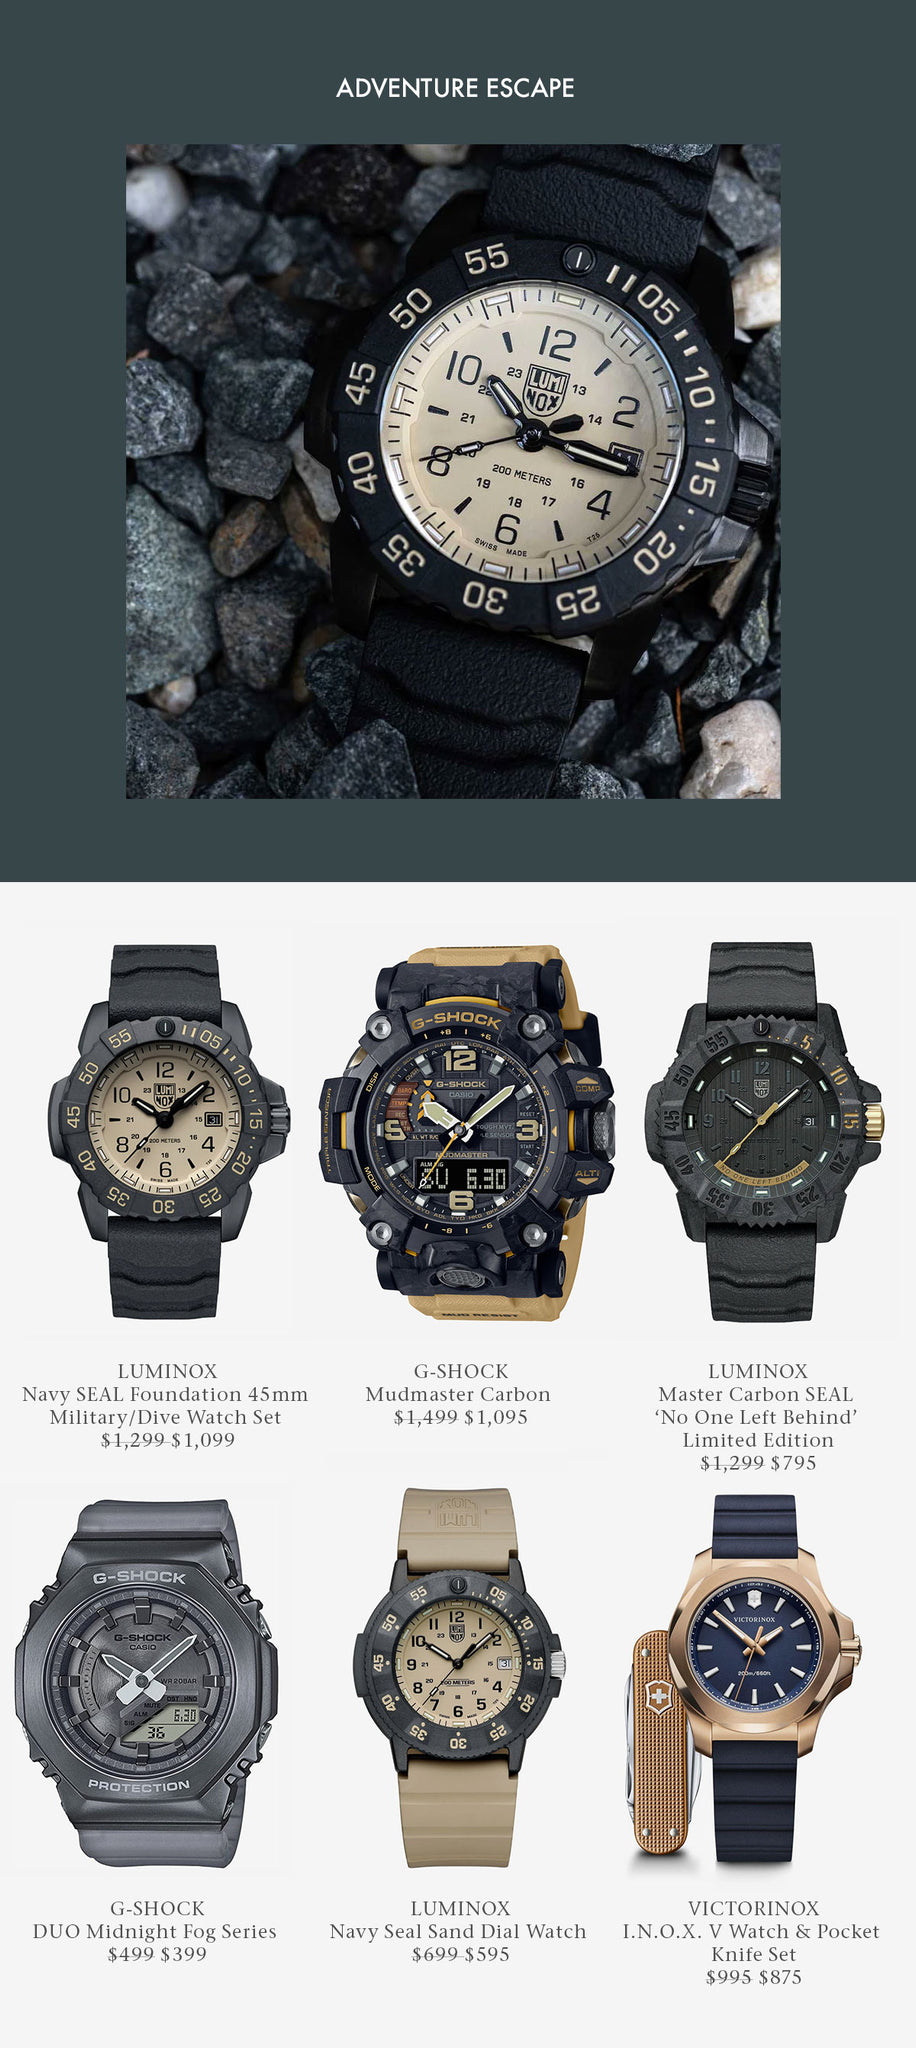 Watches perfect for a camping adventure